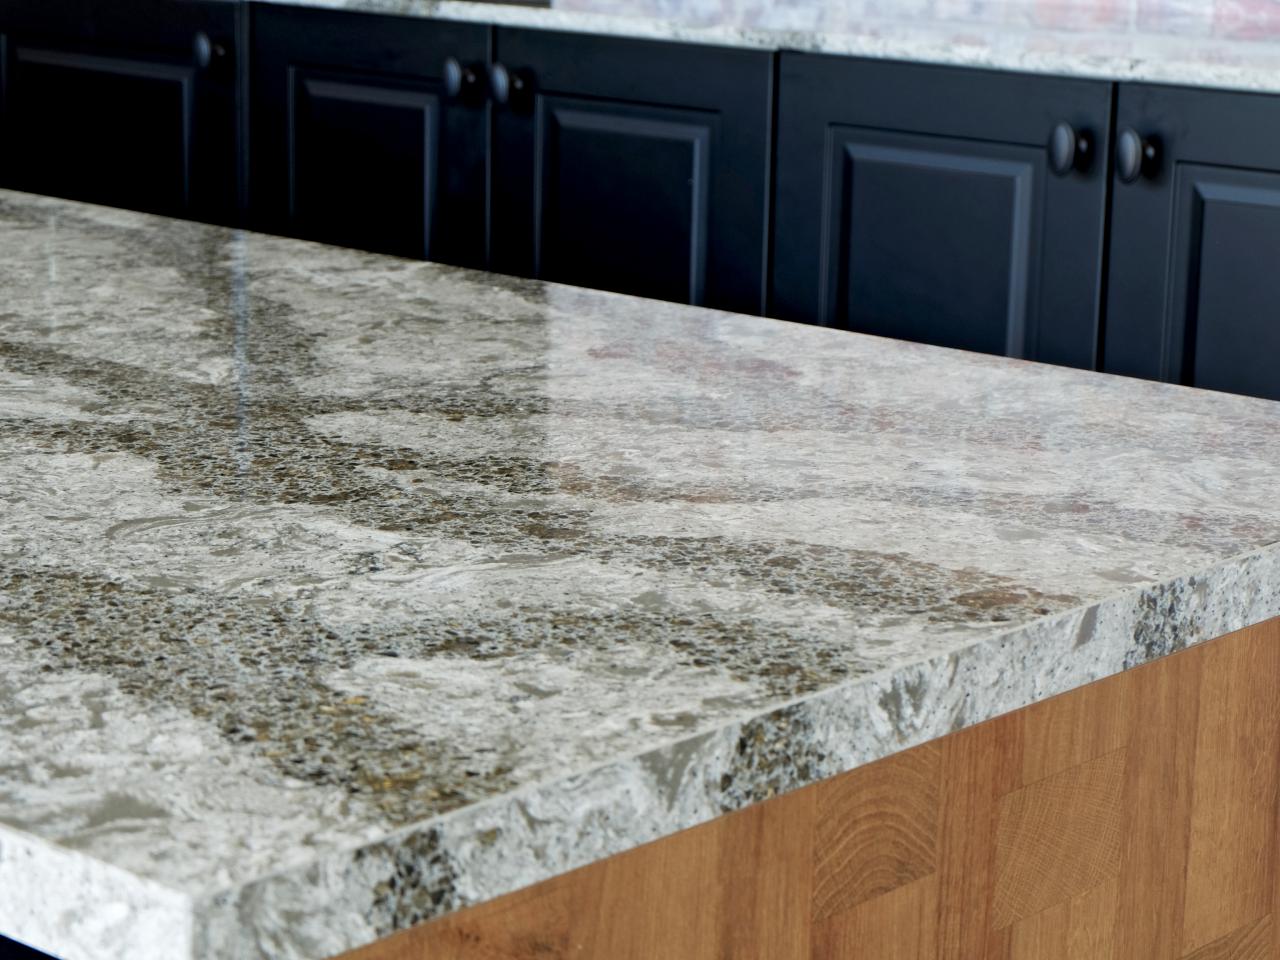 How To Cut A Quartz Countertop, What Is The Best Way To Cut Granite Countertops